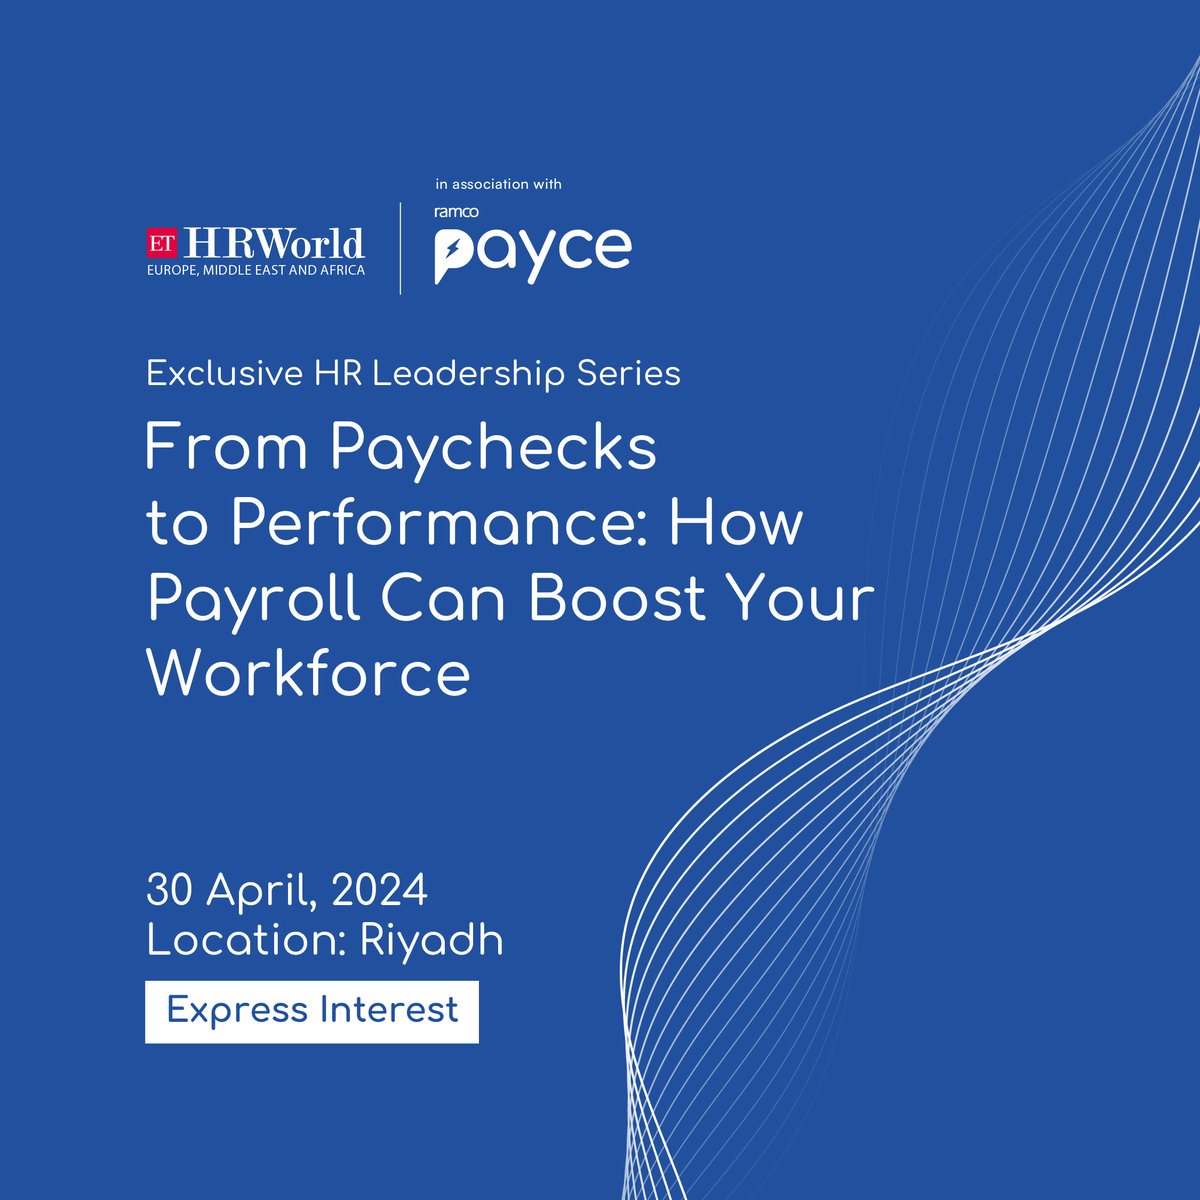 ETHRWorld EMEA in association with @RamcoSystems presents an exclusive HR Leadership Series on 'From Paychecks to Performance: How Payroll Can Boost Your Workforce' on April 30, 2024 Express Interest - zurl.co/lLjx #ETHRWorldEMEA #Payroll #Workforce #Paycheck